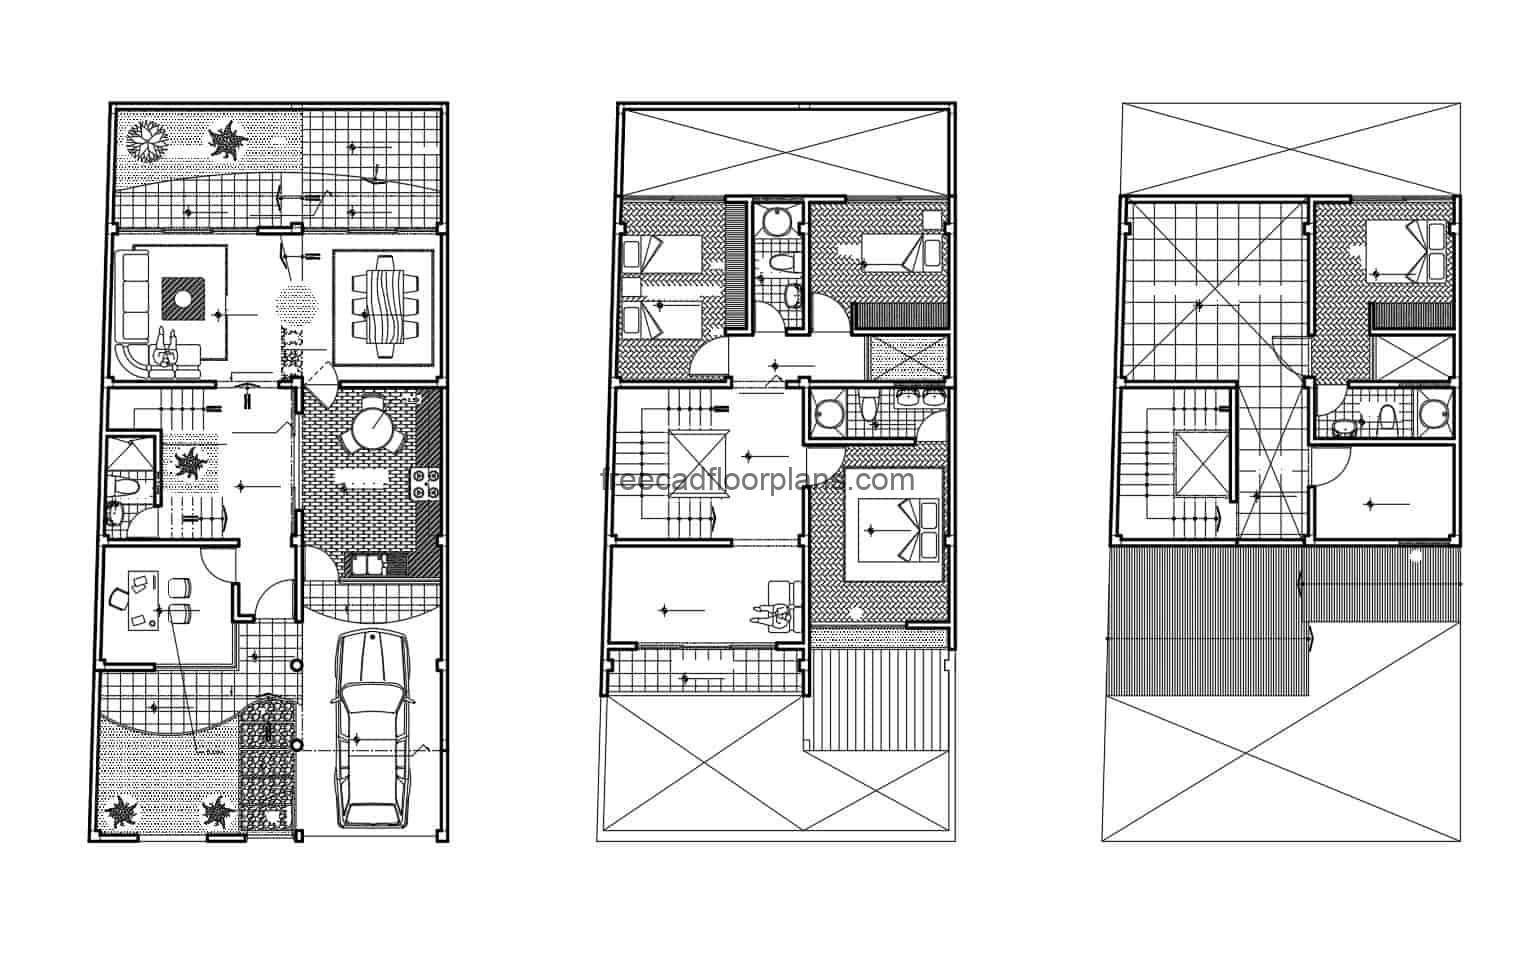 Plan in autocad for free download, three-level house with four rooms